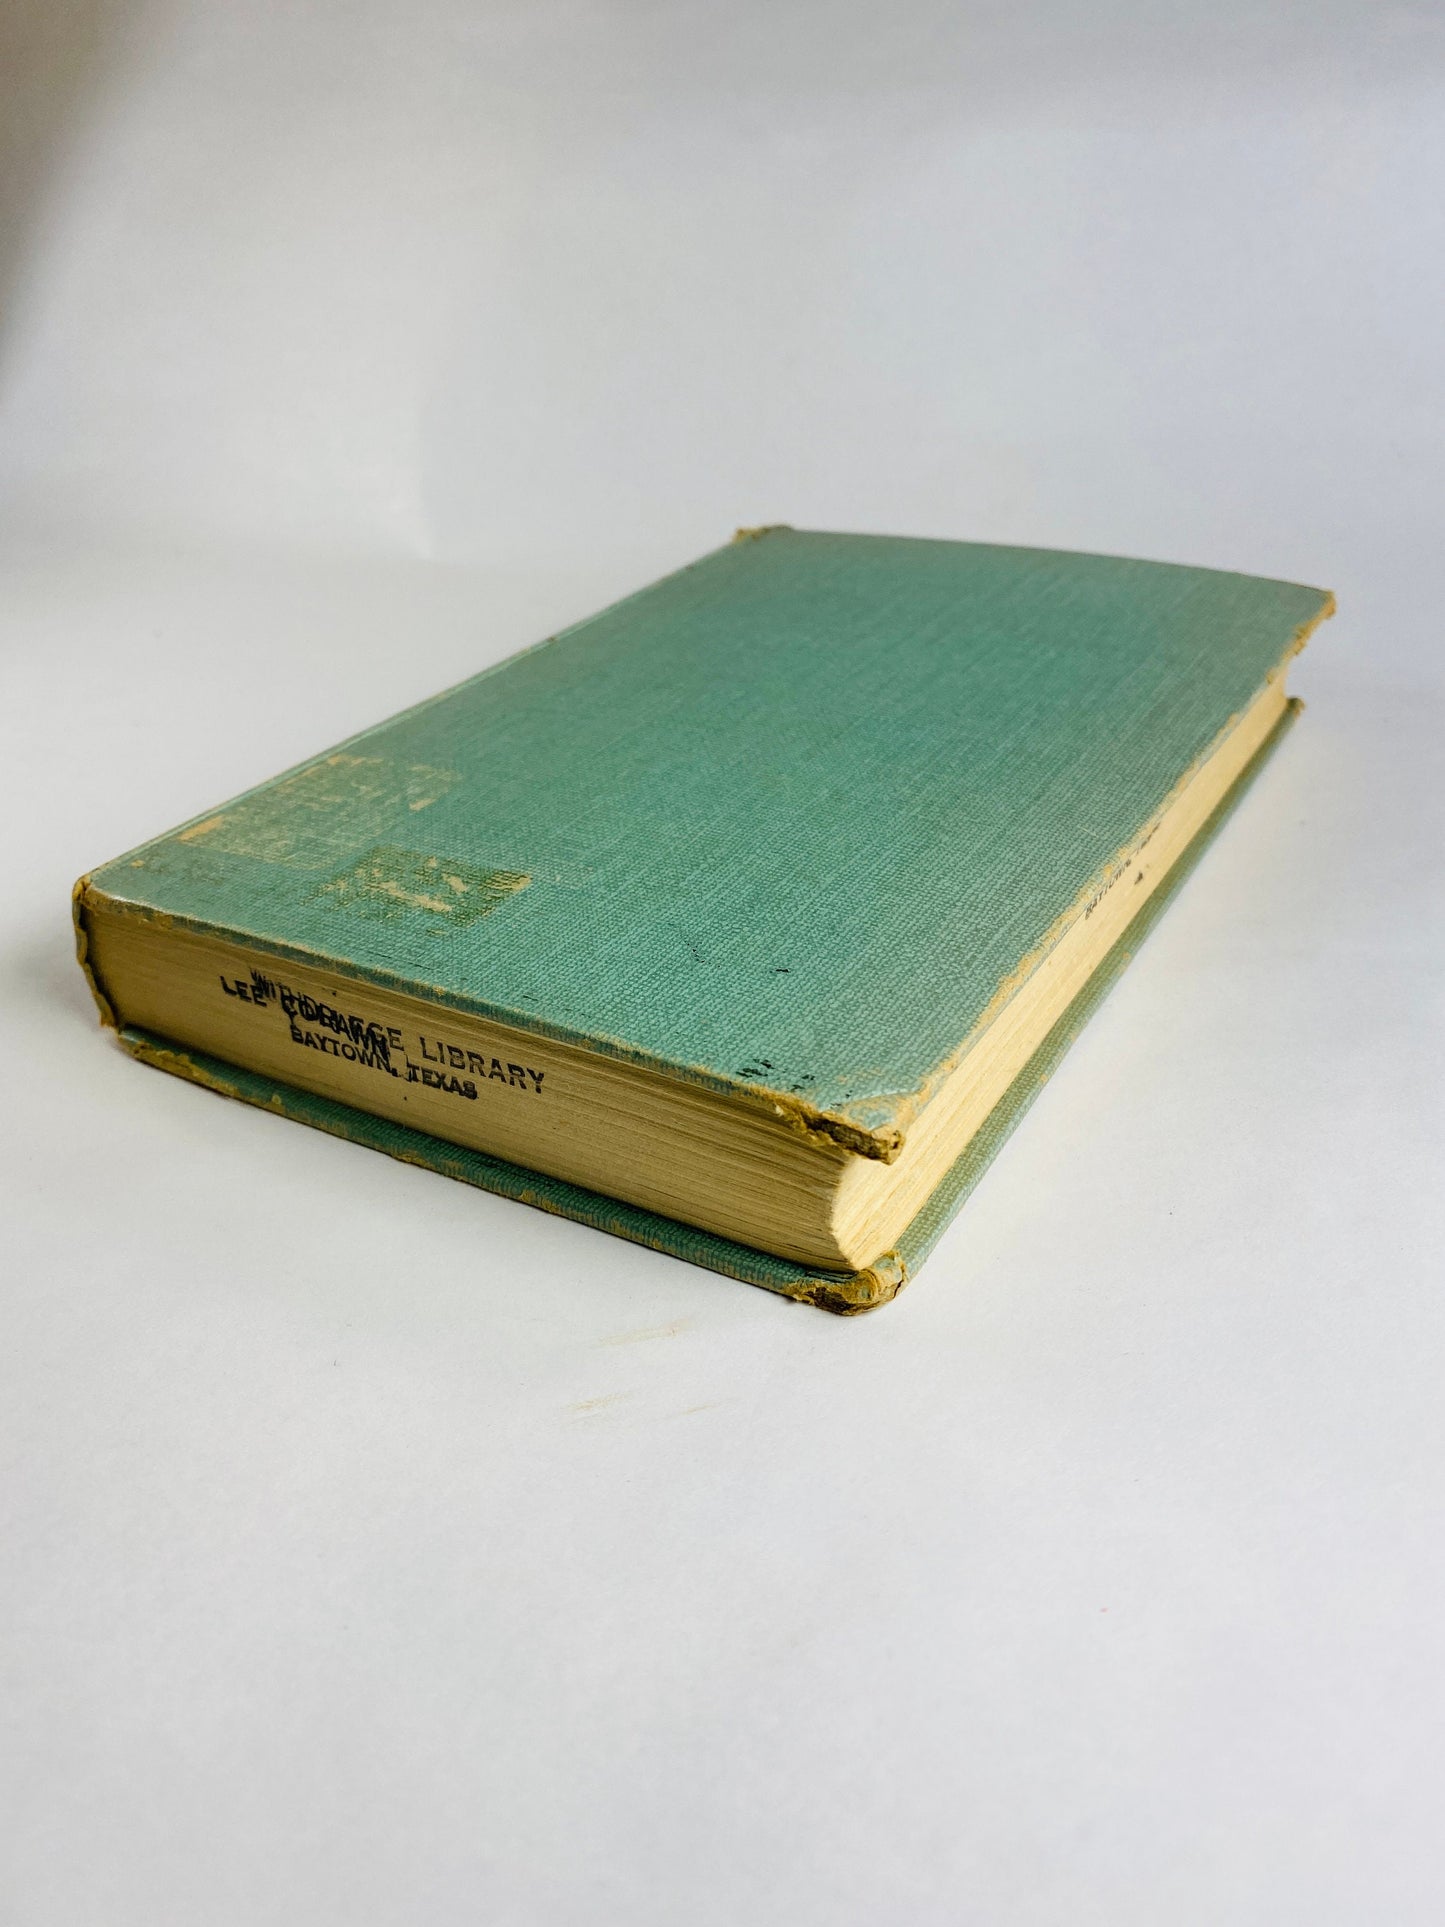 Mark Twain's biography vintage book by Jerry Allen circa 1954 FIRST EDITION green cloth binding